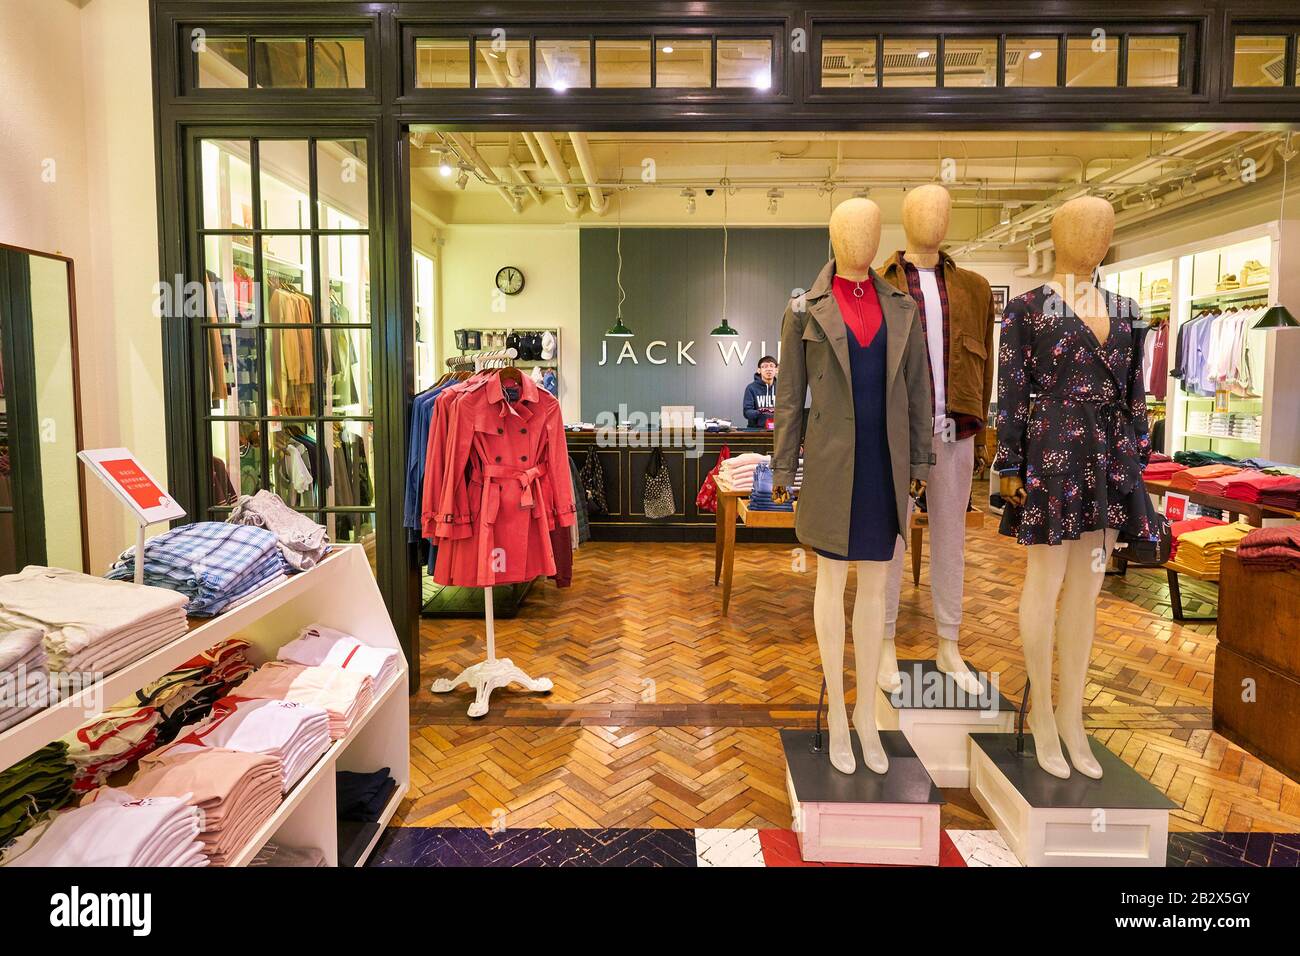 Page 2 - Jack Wills Clothing Shop Store High Resolution Stock Photography  and Images - Alamy